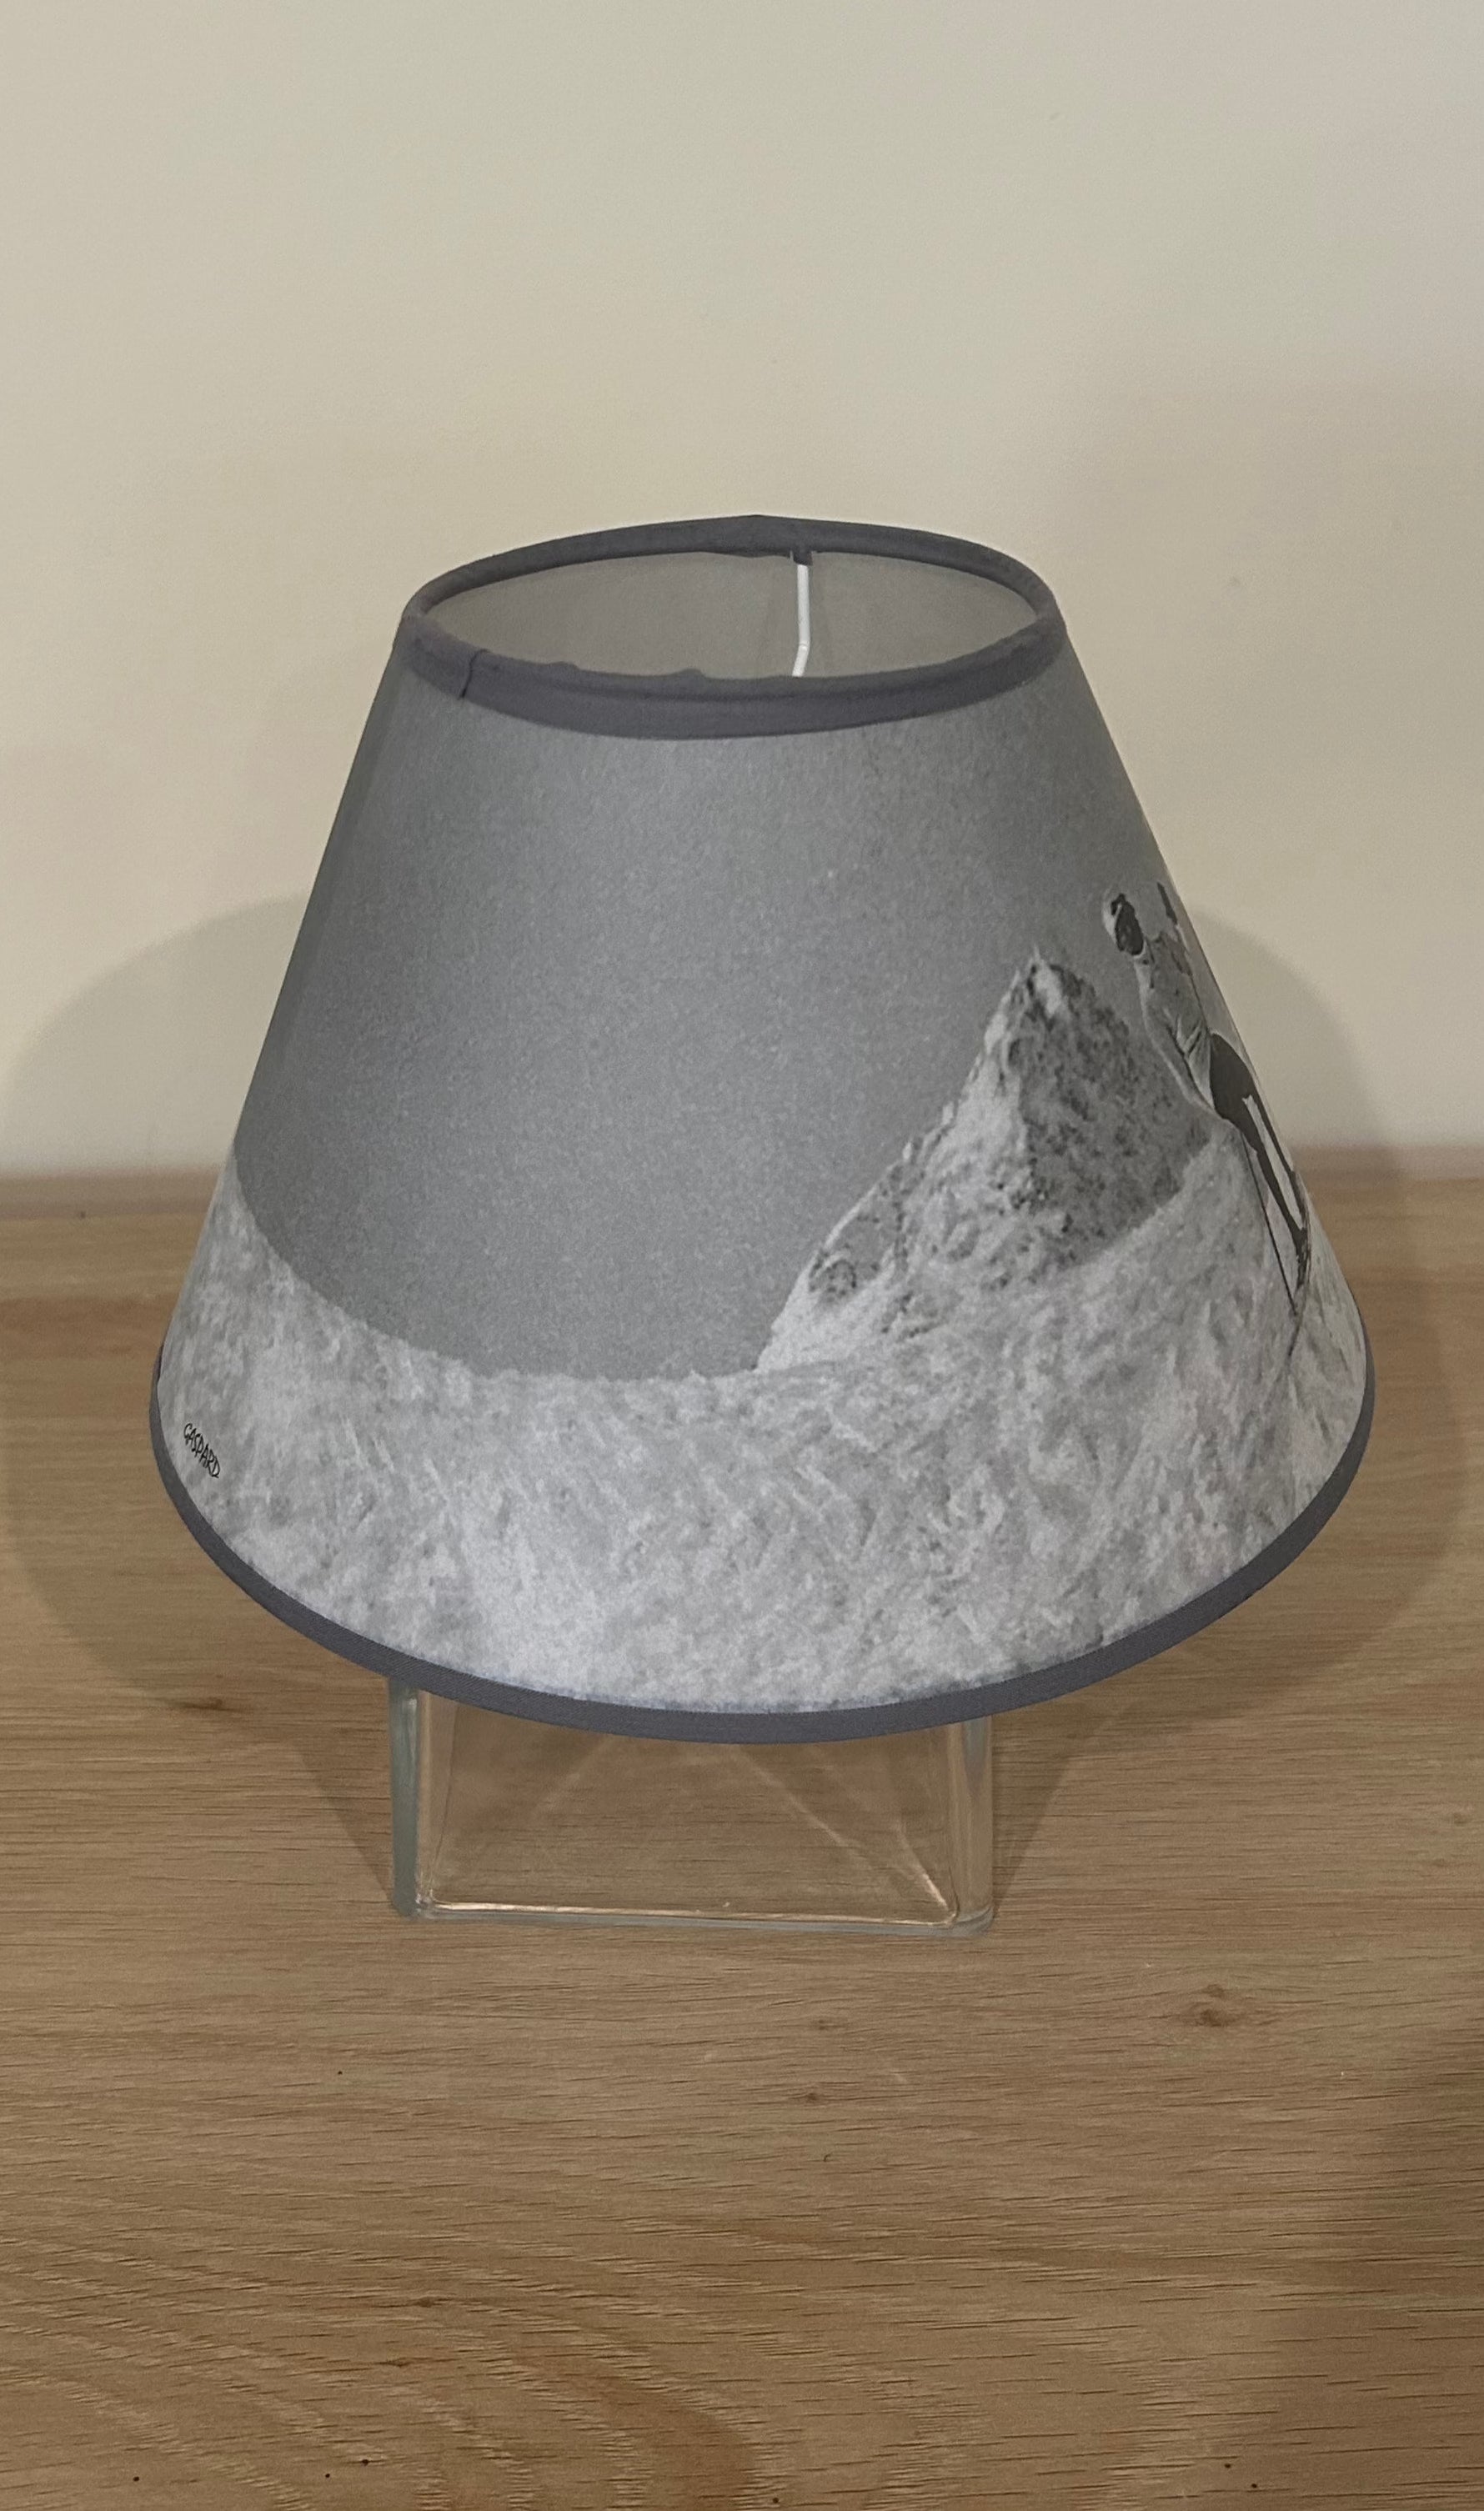 This lamp shade is a vintage black &amp; white photo two men and a woman standing on skis supporting themselves with vintage single long poles, against a backdrop of snow covered mountains.. On a wood table top. Side view